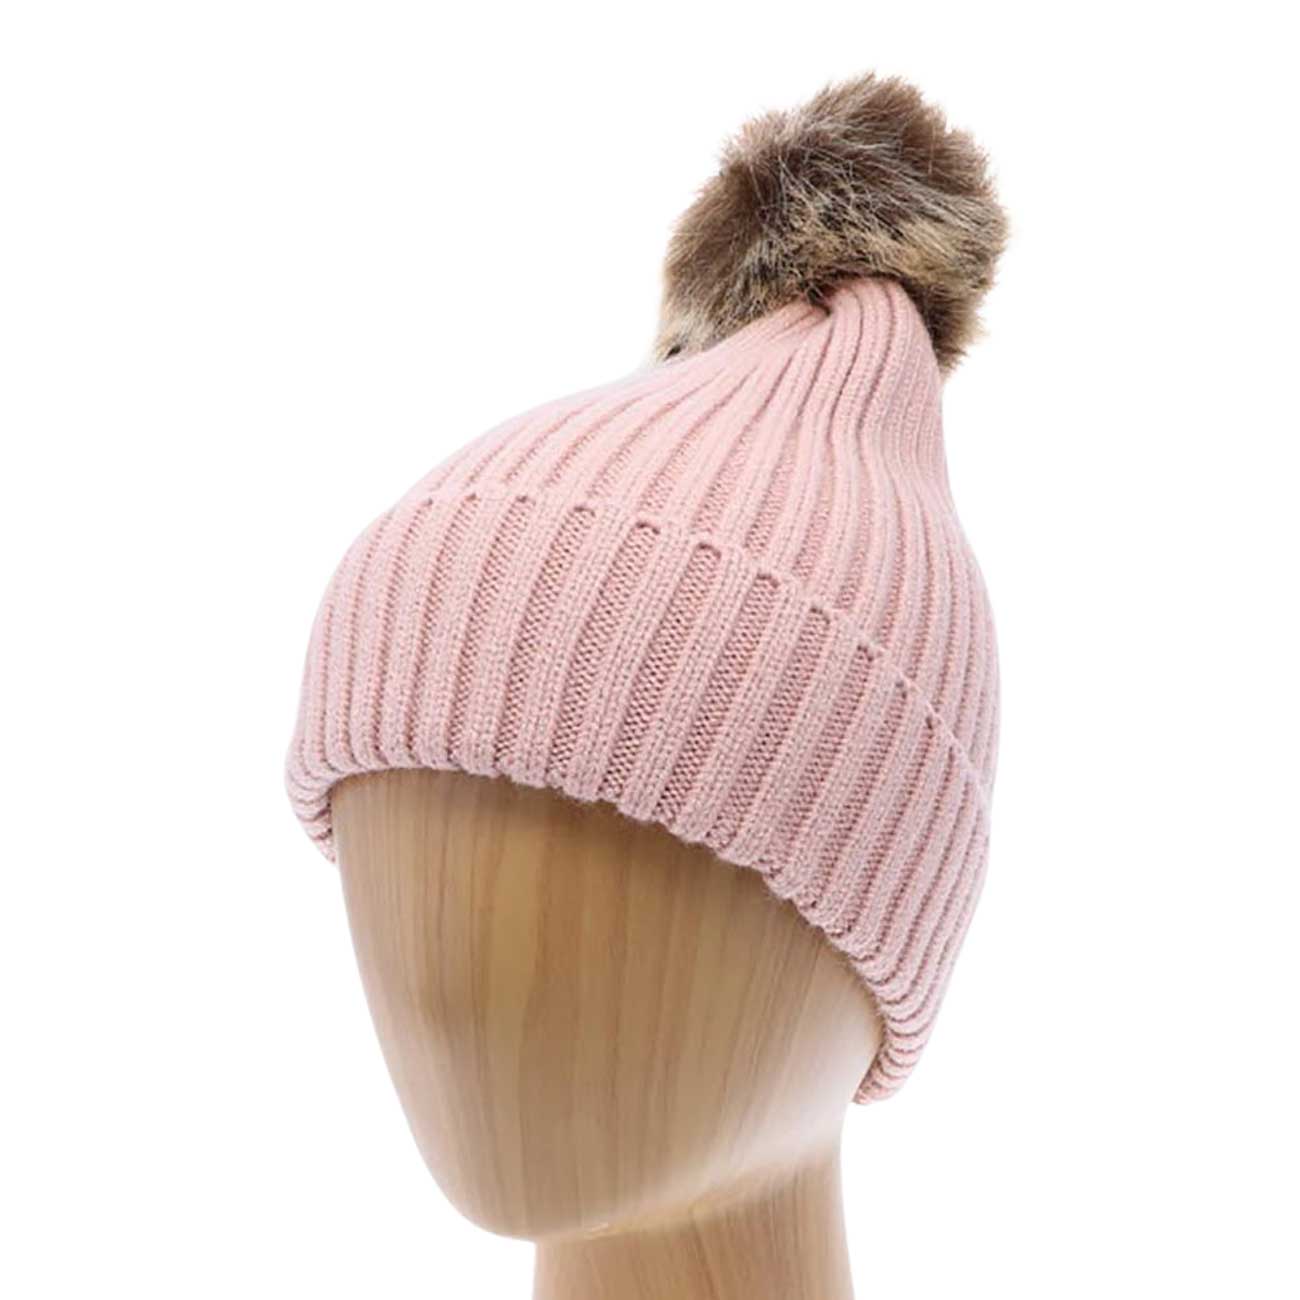 Pink Soft Knit Faux Pom Pom Beanie Hat. From daily life to holidays, this super stylish beanie hat's cozy fabric will keep you looking great and feeling warm. It's elegant, comfortable, and fashionable. Perfect for casual, trips, holidays, sports, skiing, skating, hiking, etc. or simply just for cold weather. 